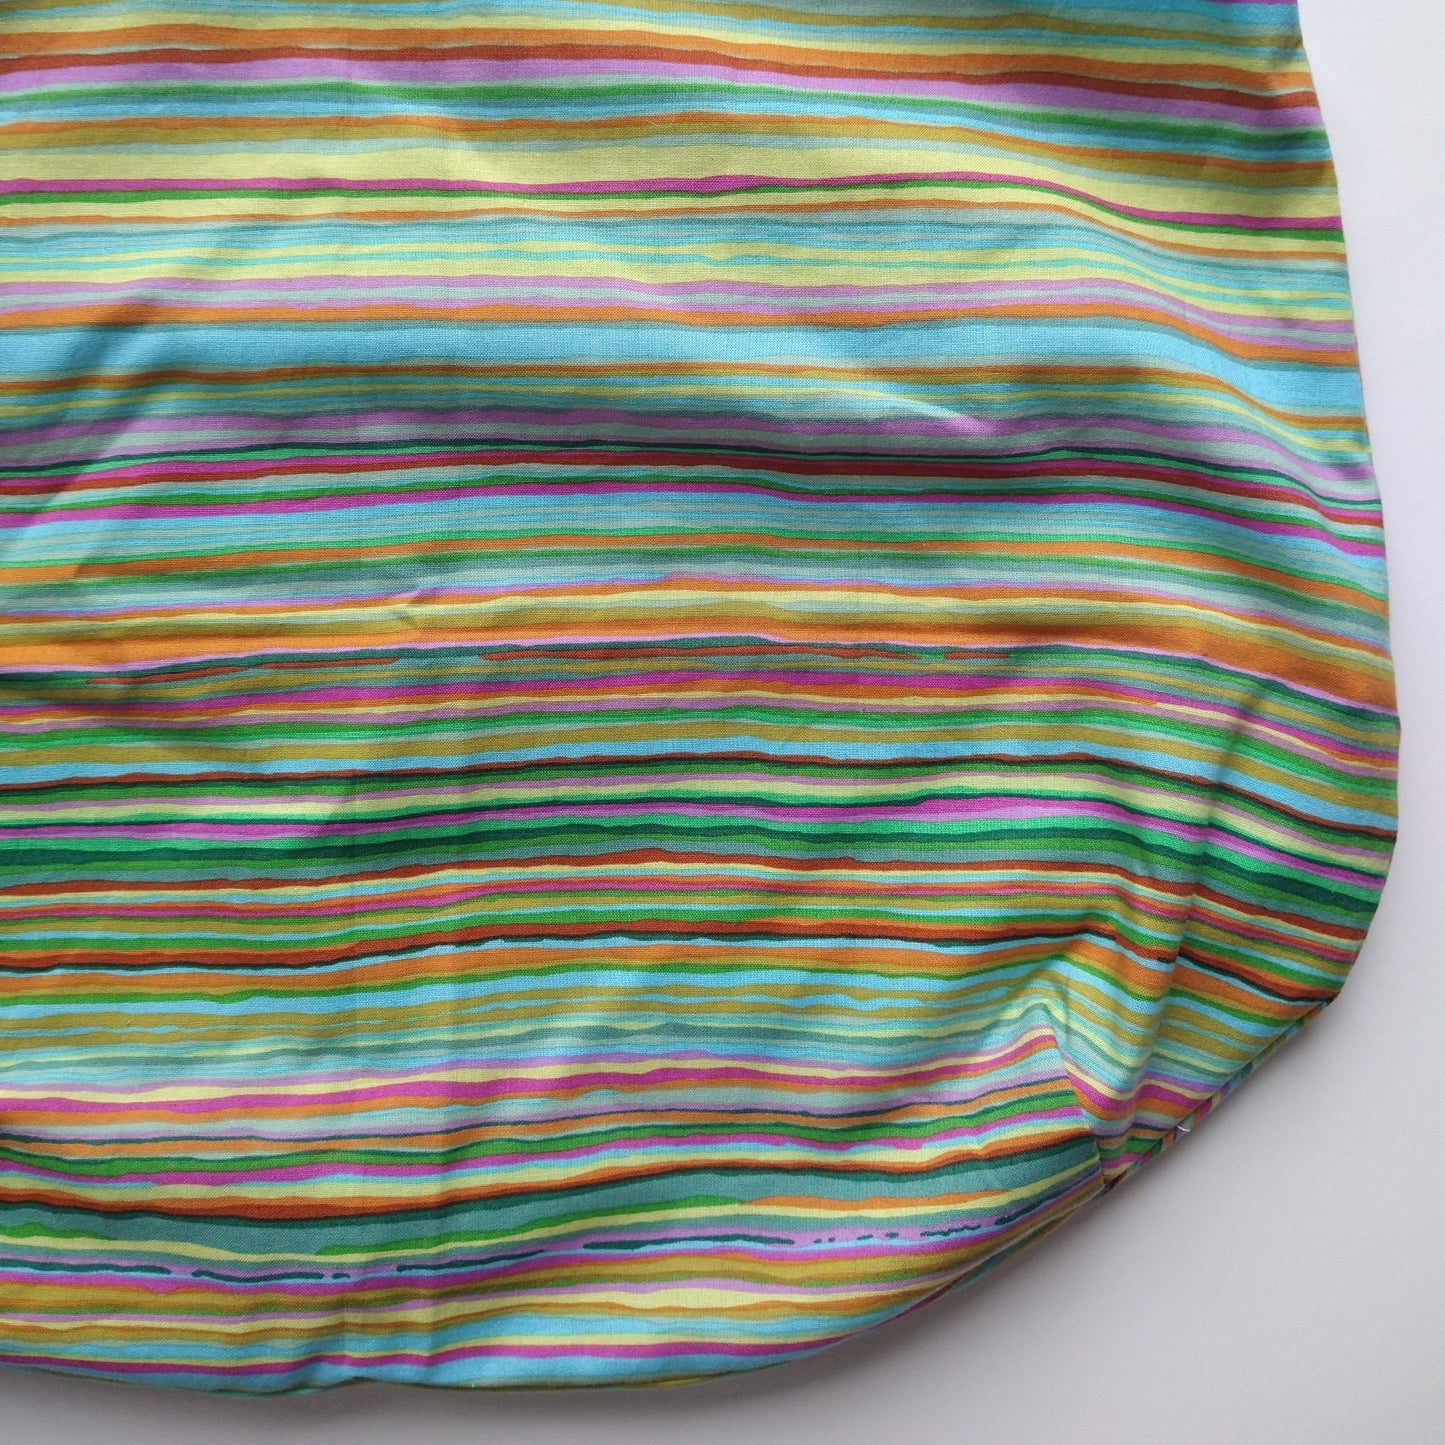 Shopping bag, reversible, size small, multi stripes (Handmade in Canada)